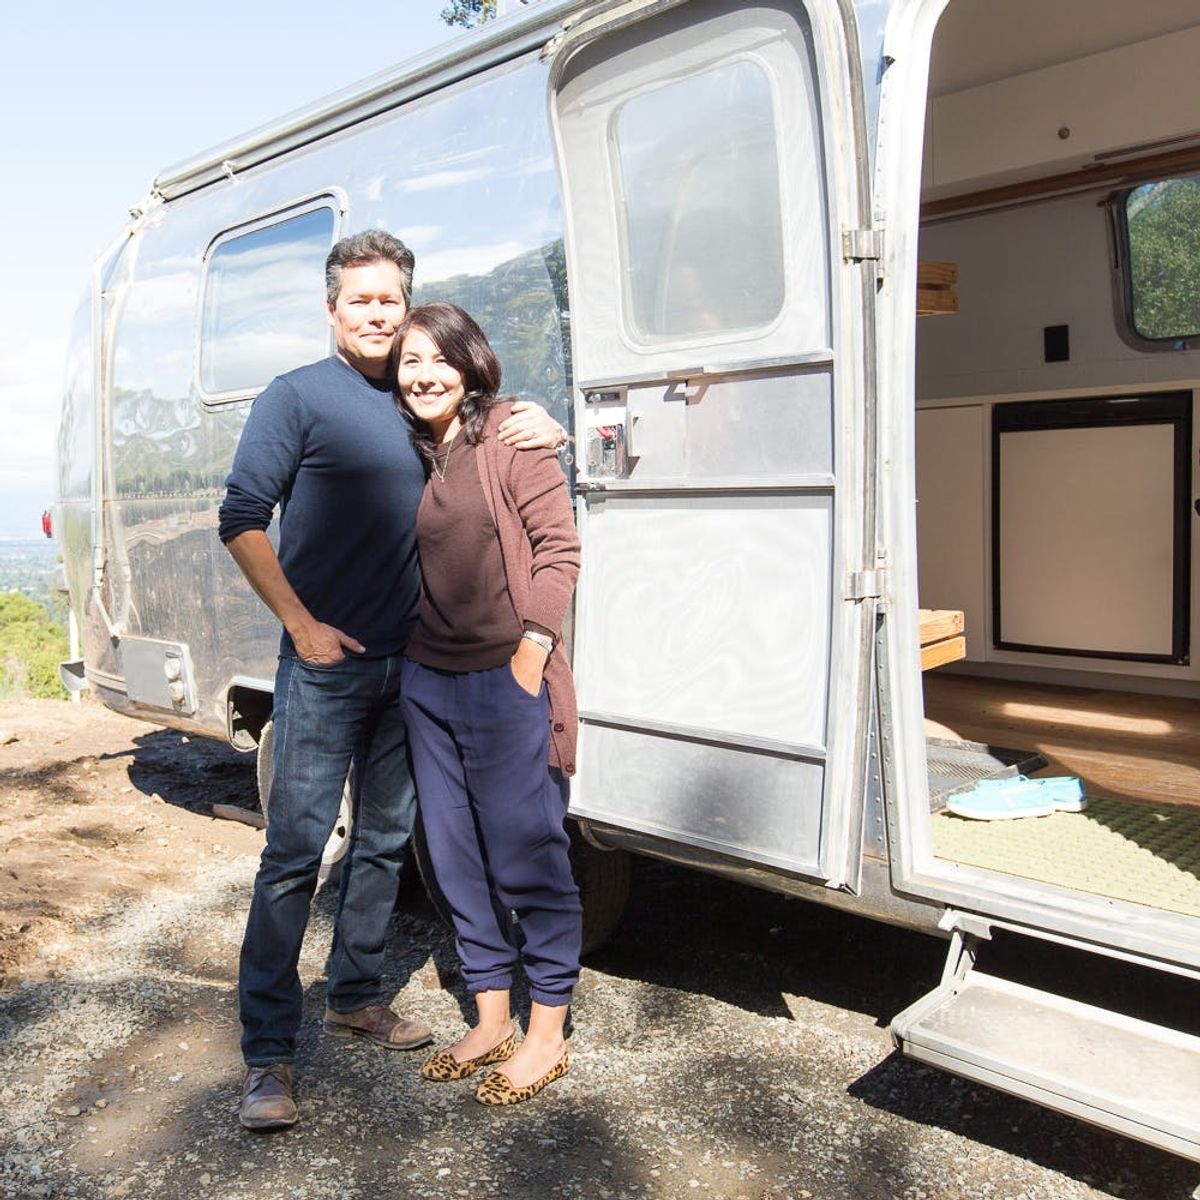 This Airstream Makeover Will Give You Major #Wanderlust